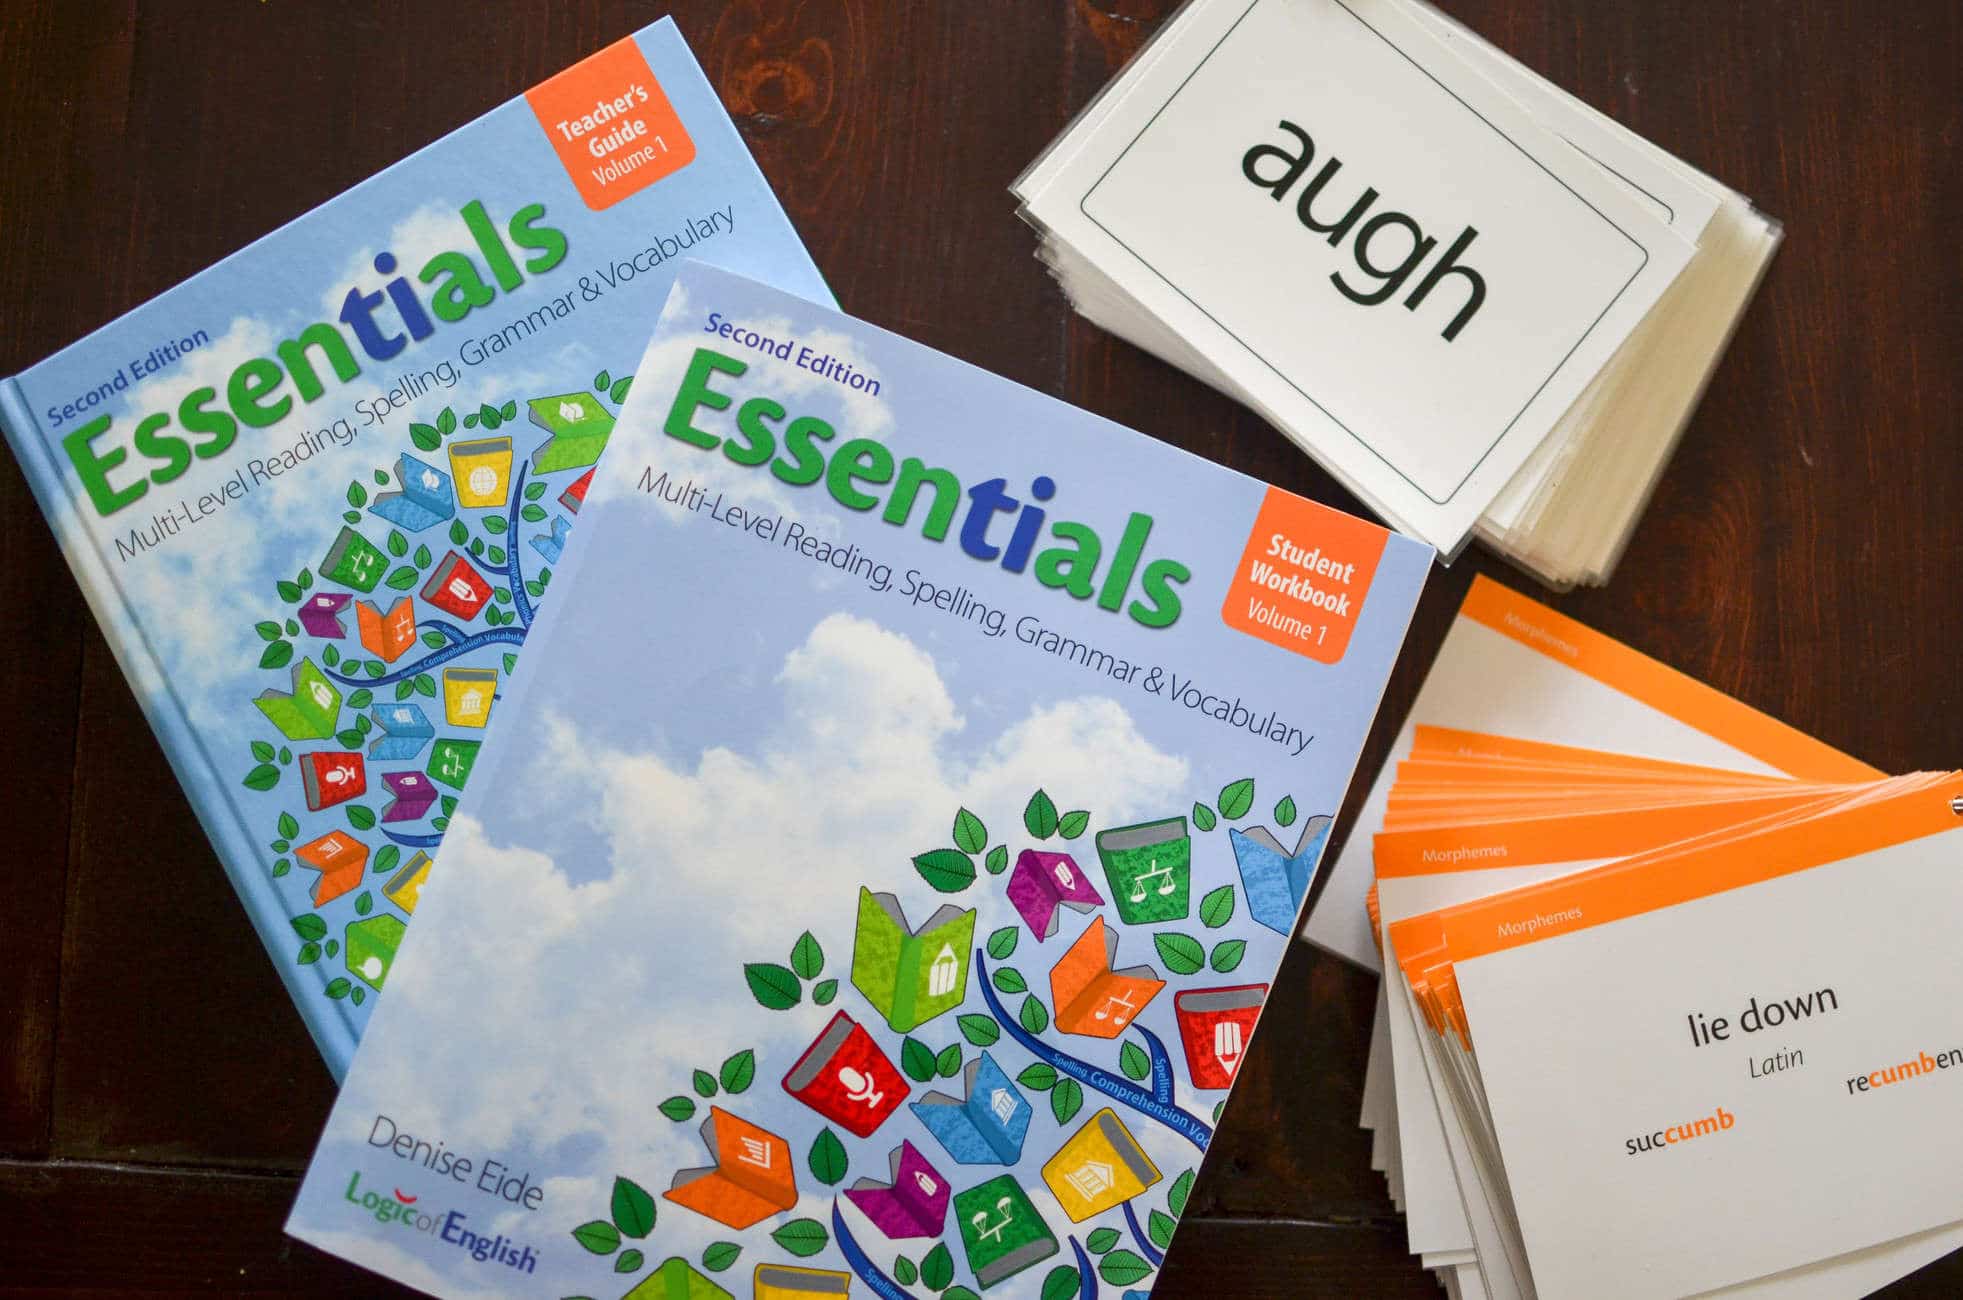 What’s New? Logic of English Essentials Second Edition Review and Giveaway!